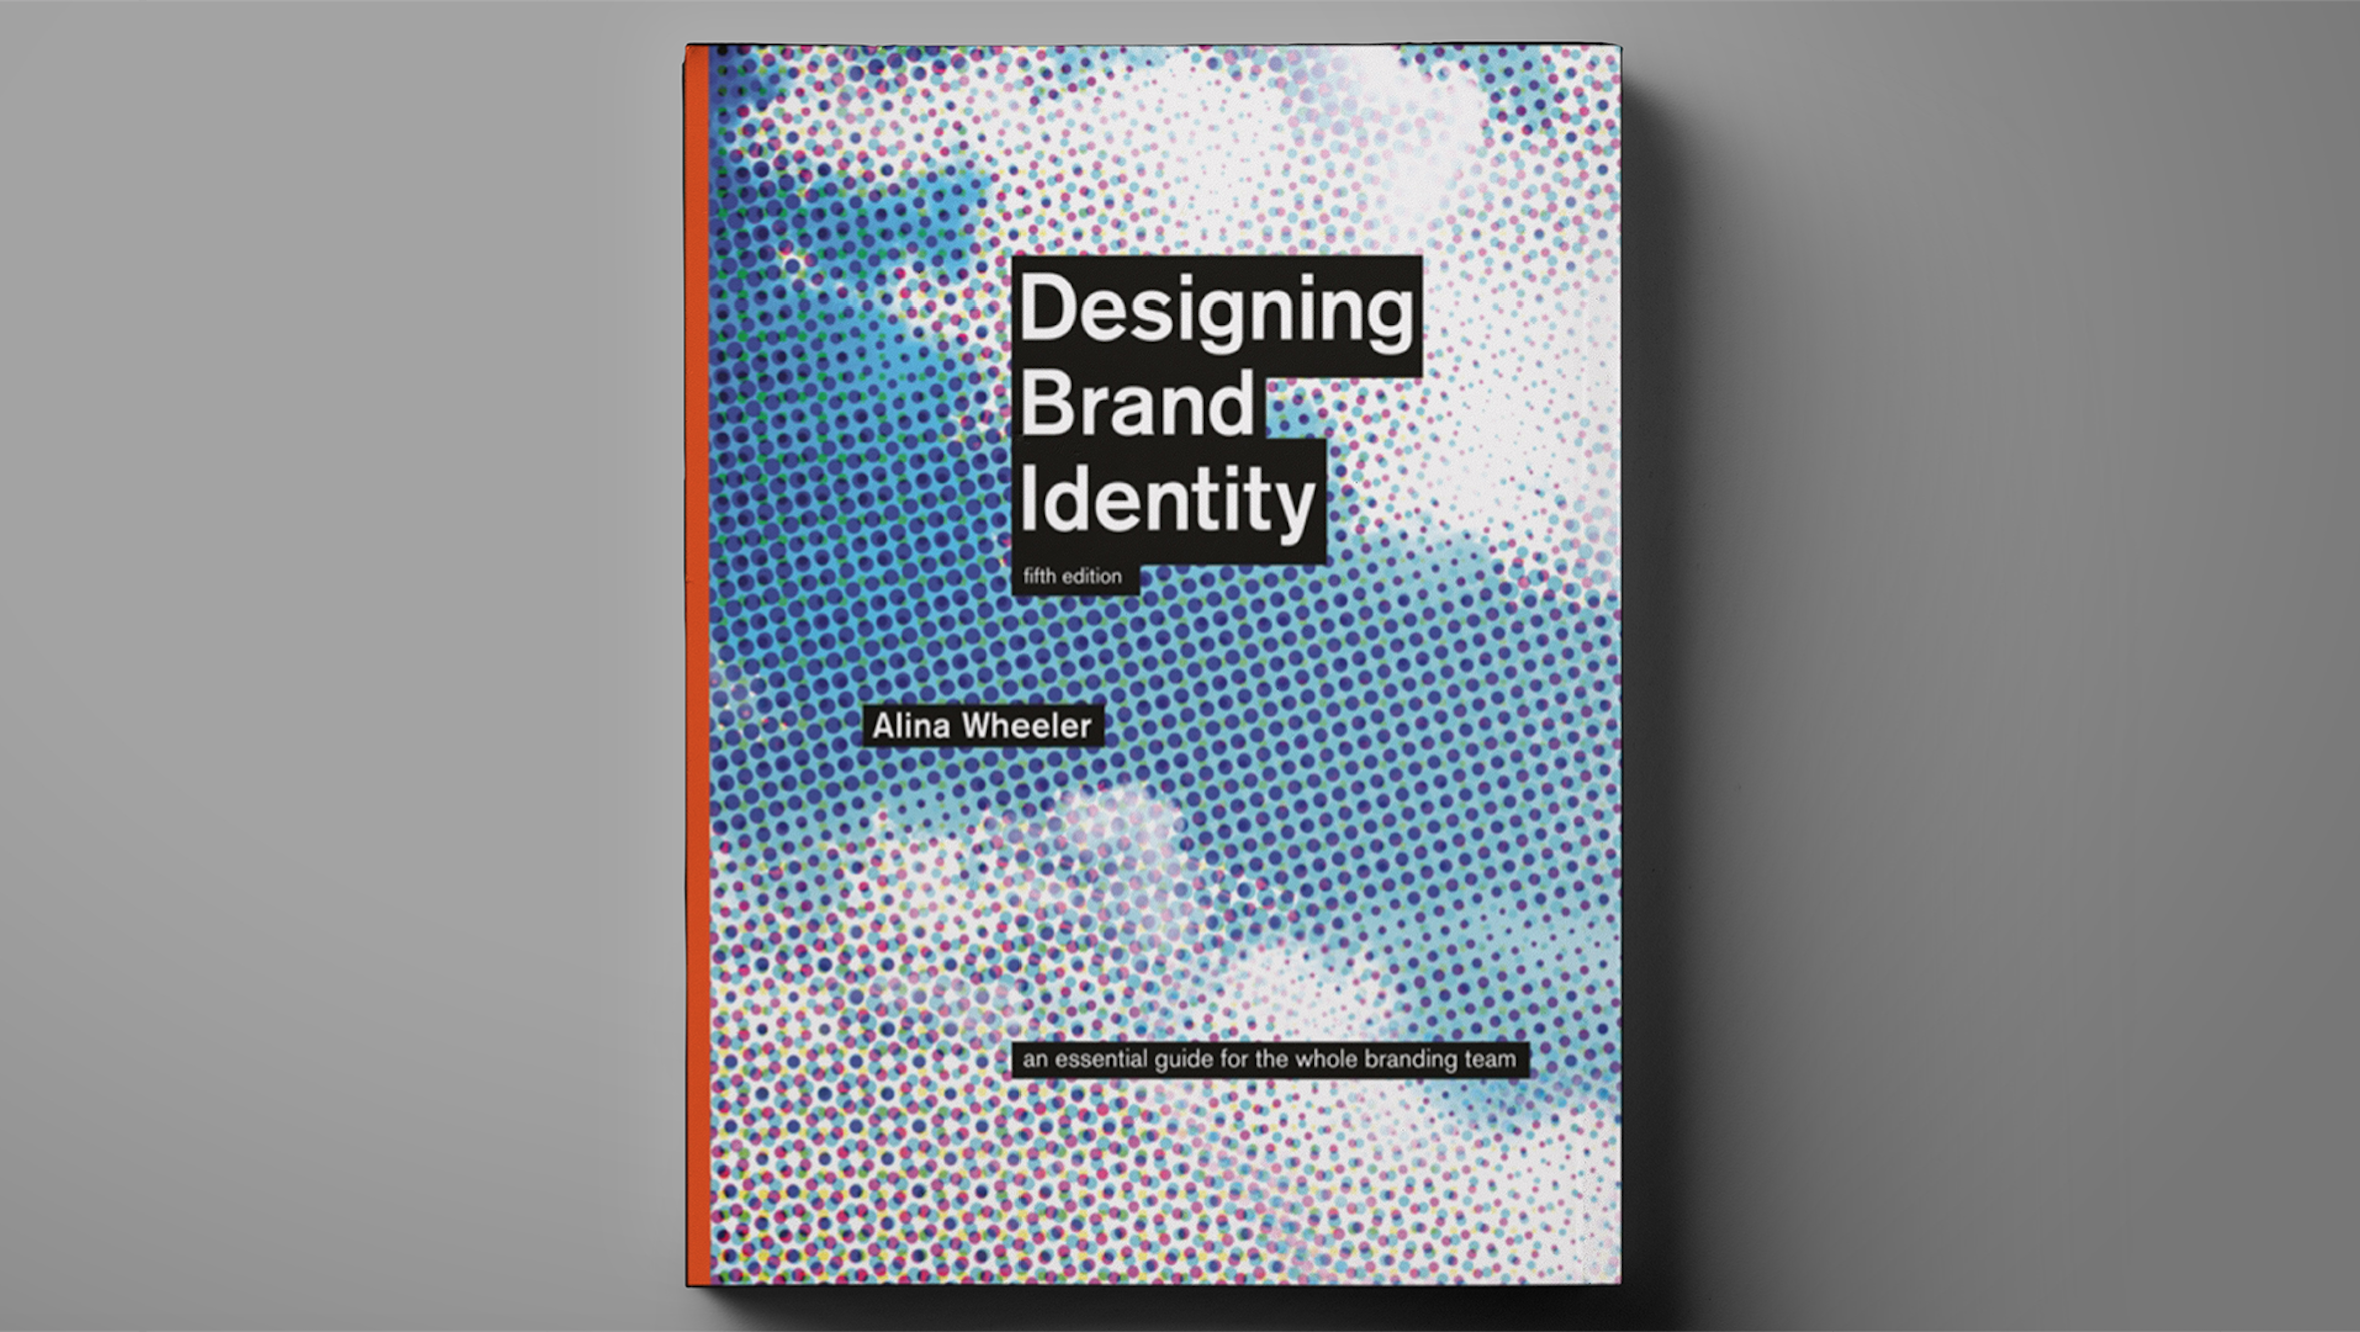 Cover shot of one of the best graphic design books, Designing Brand Identity